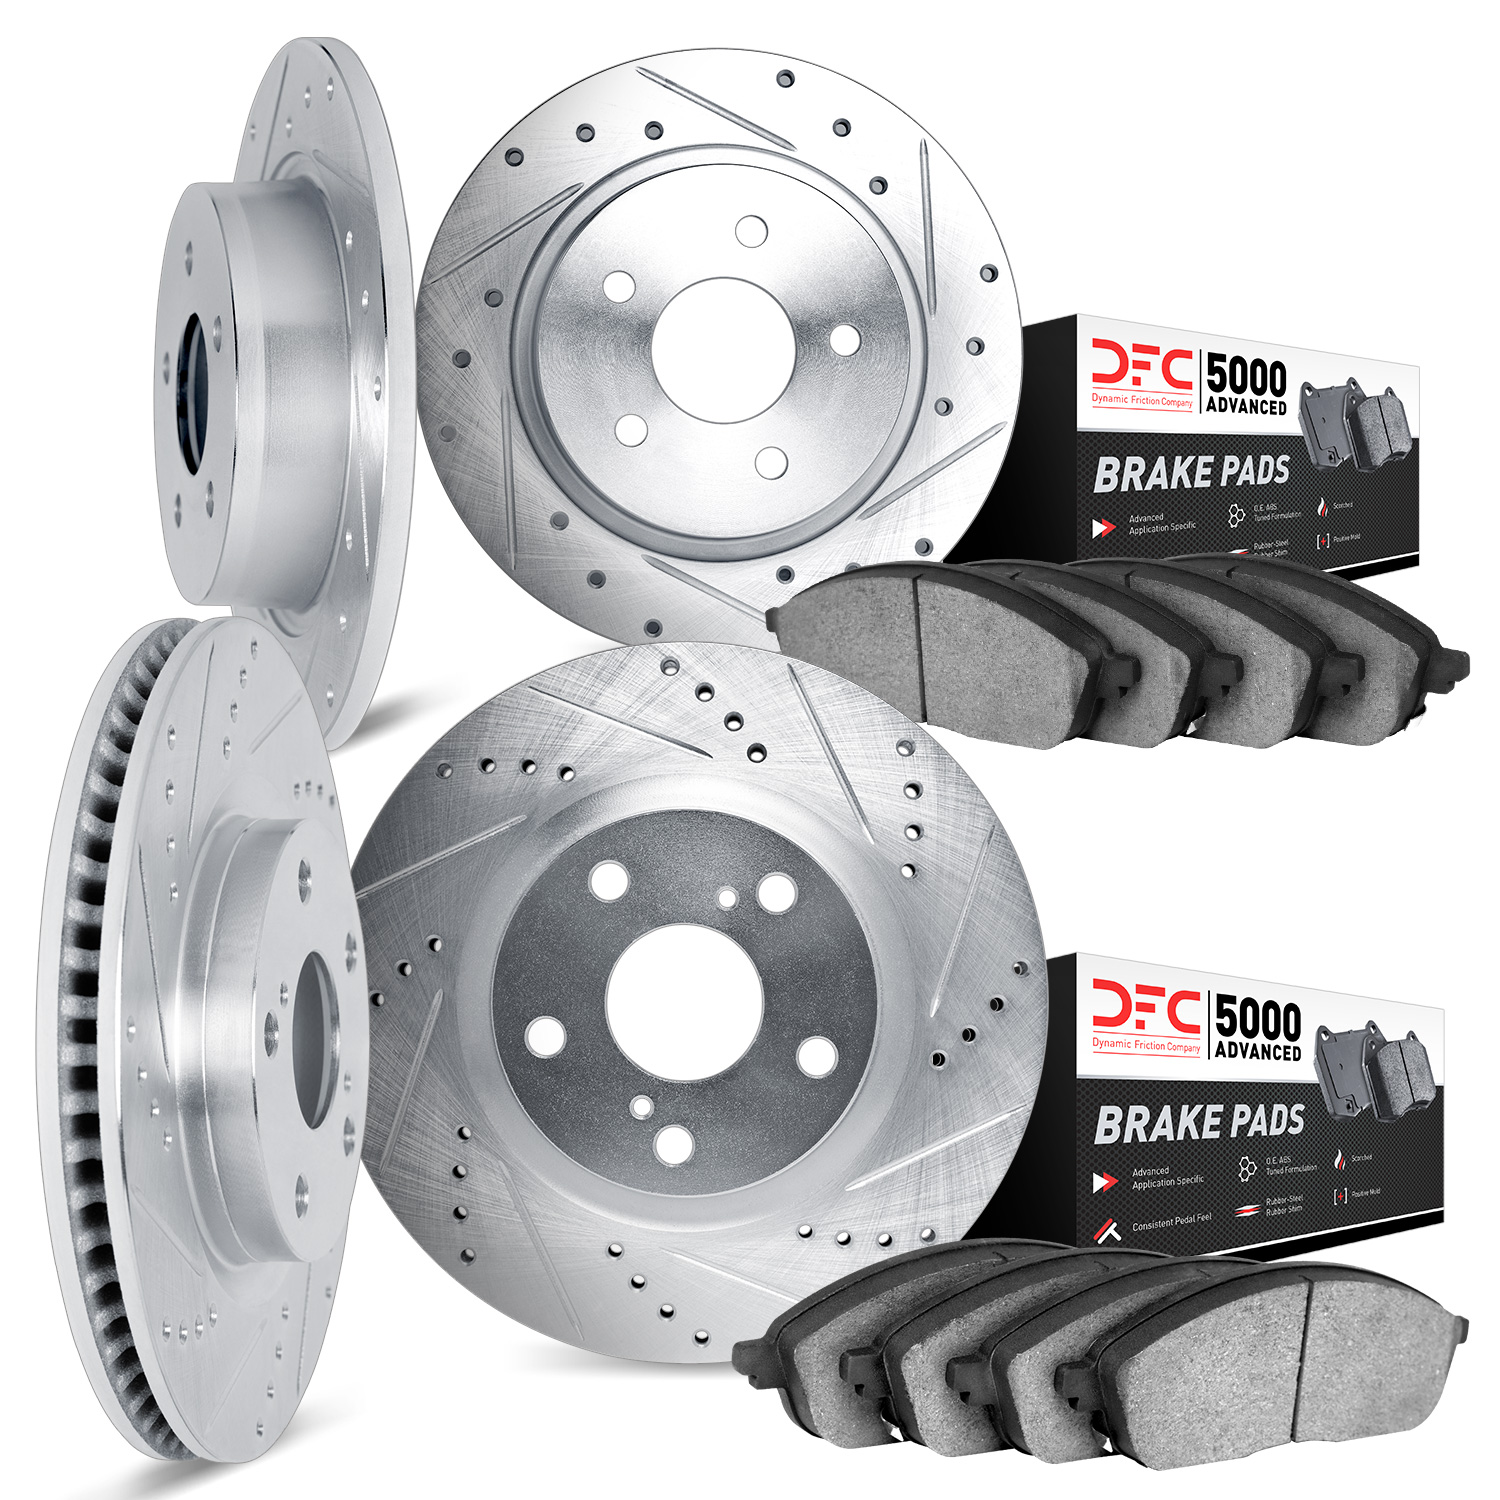 7504-76152 Drilled/Slotted Brake Rotors w/5000 Advanced Brake Pads Kit [Silver], 2002-2006 Lexus/Toyota/Scion, Position: Front a